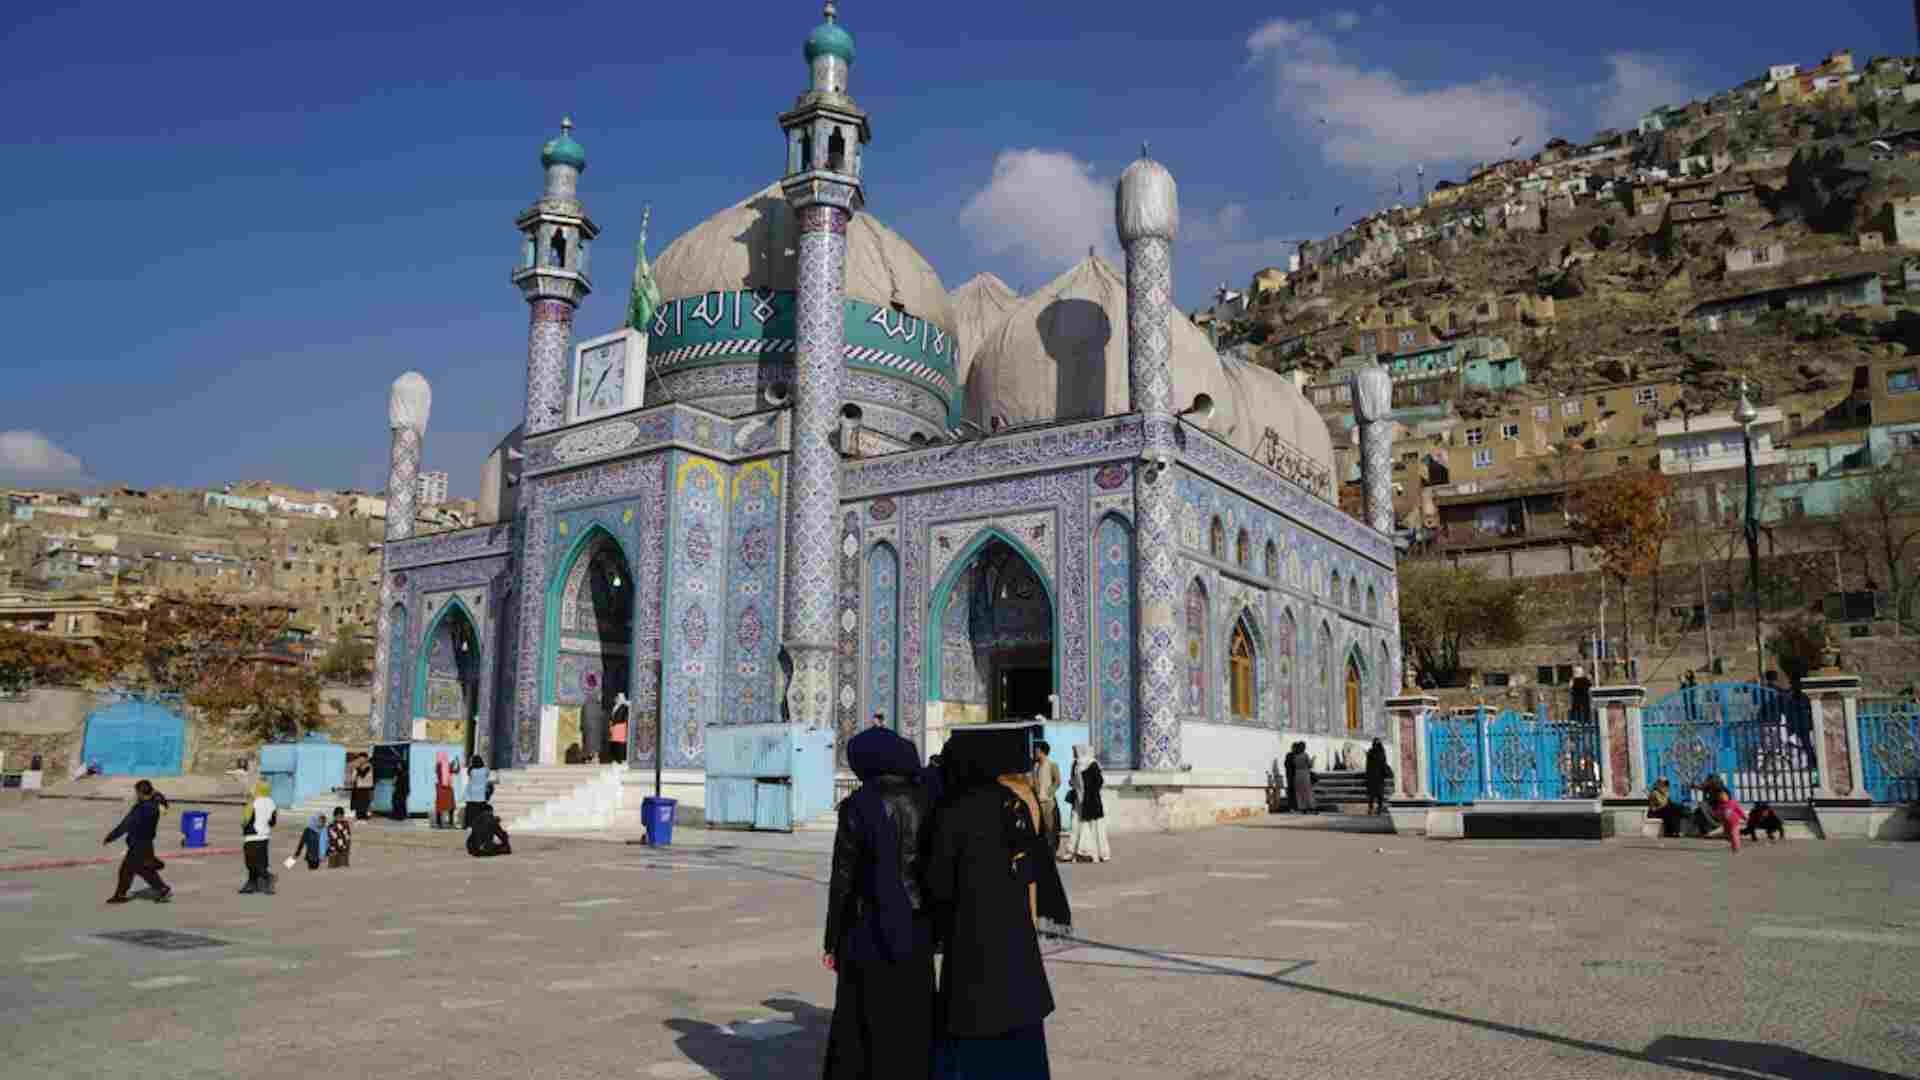 Afghanistan’s Tourism Industry Faces Uncertainty Amidst Safety Concerns And Economic Hopes